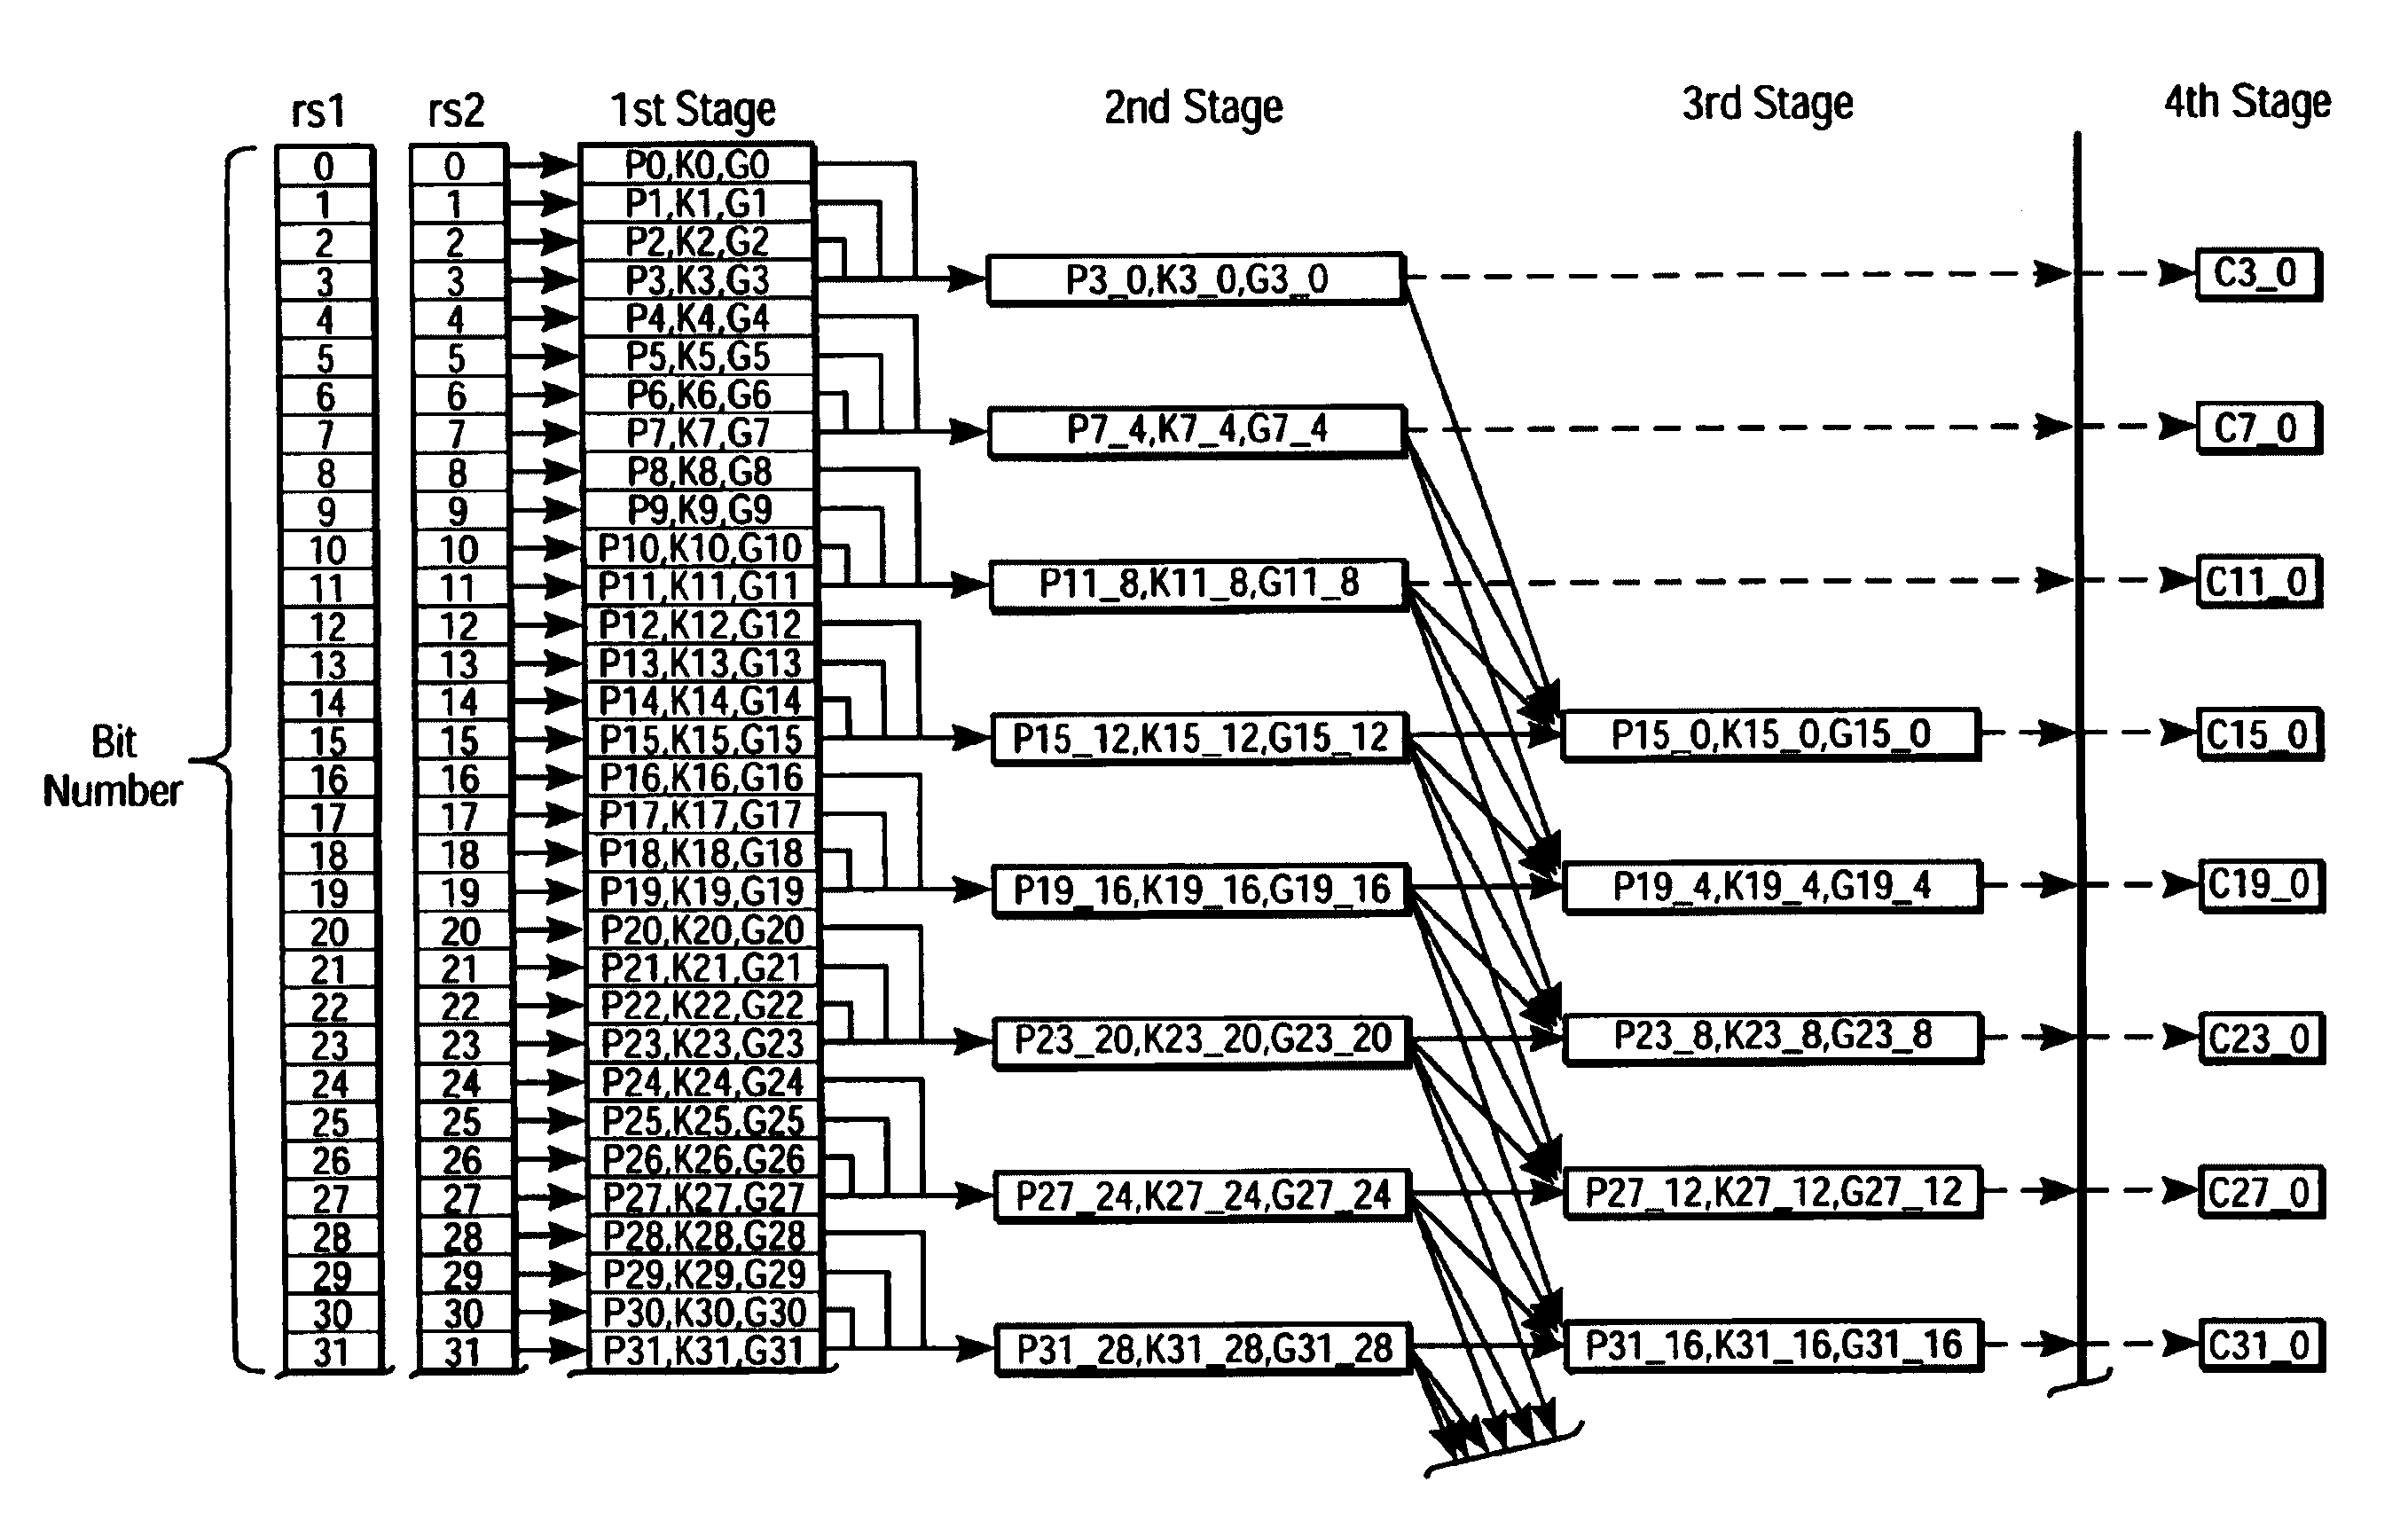 Complementary pass gate logic implementation of 64-bit arithmetic logic unit using propagate, generate, and kill